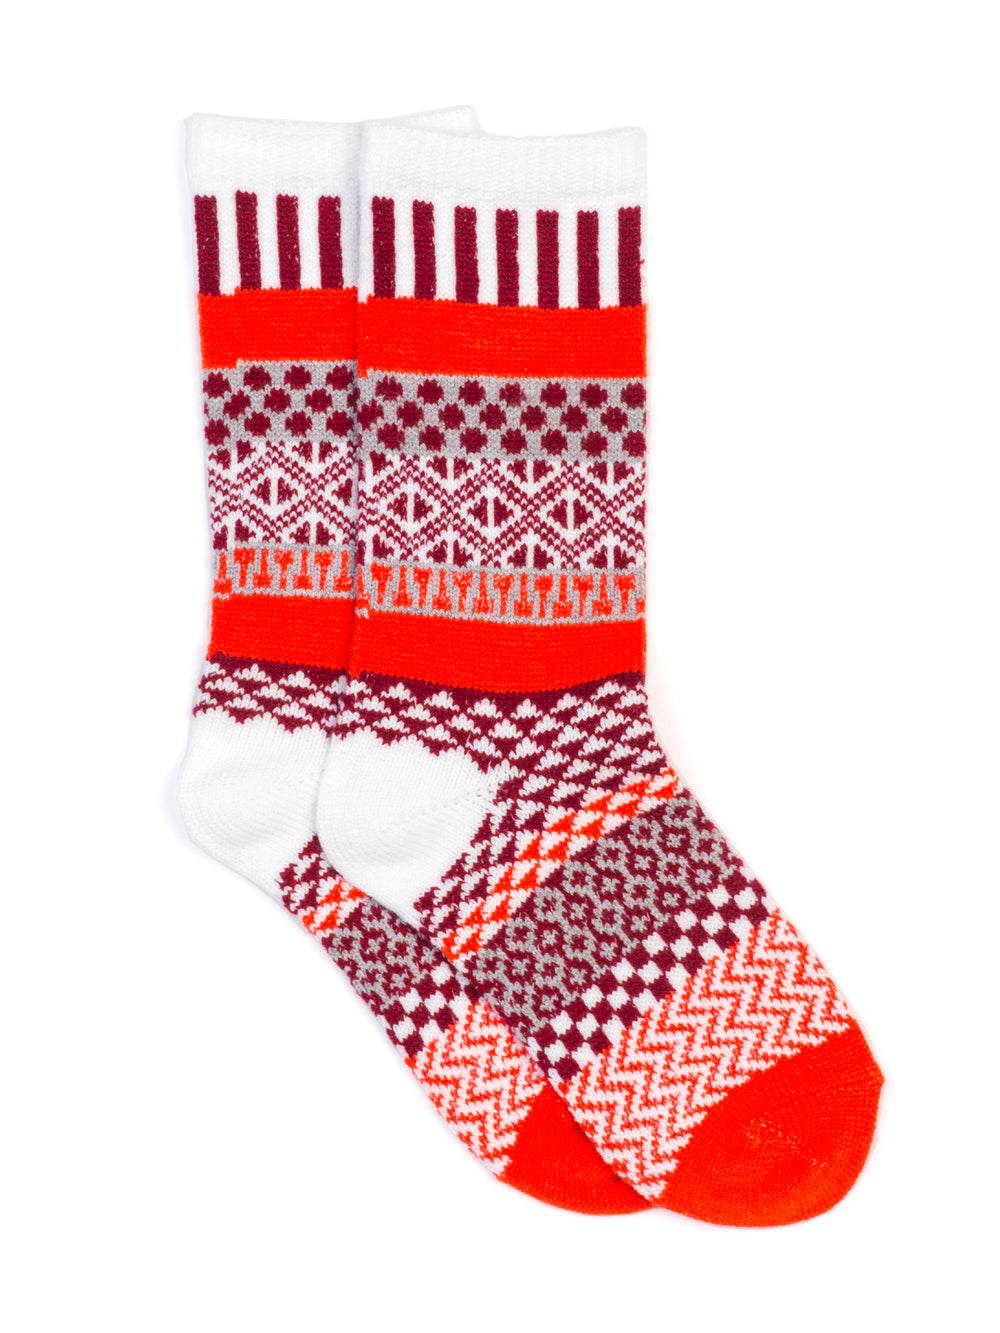 SCOUT & TRAIL COZY KNIT CREW SOCKS - CLEARANCE